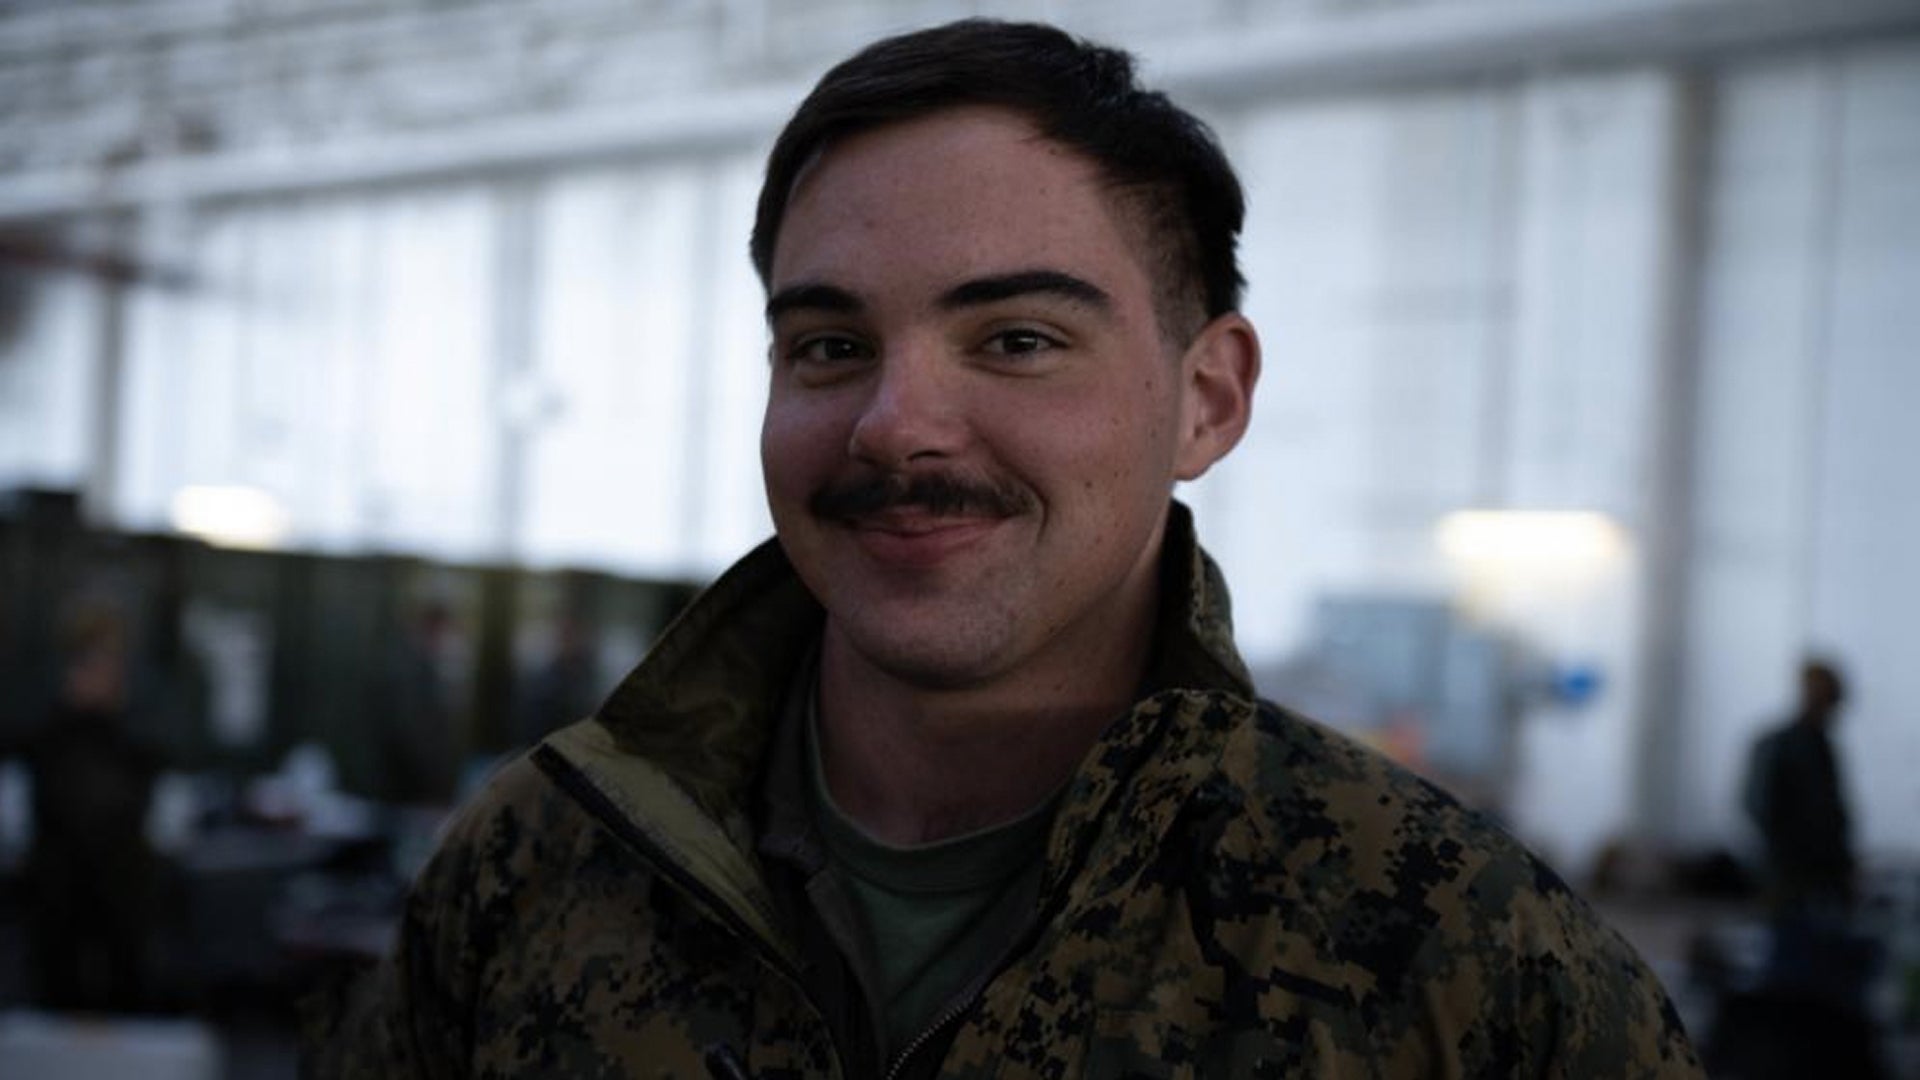 The Air Force published an entire photo album of mustachioed troops and it’s glorious